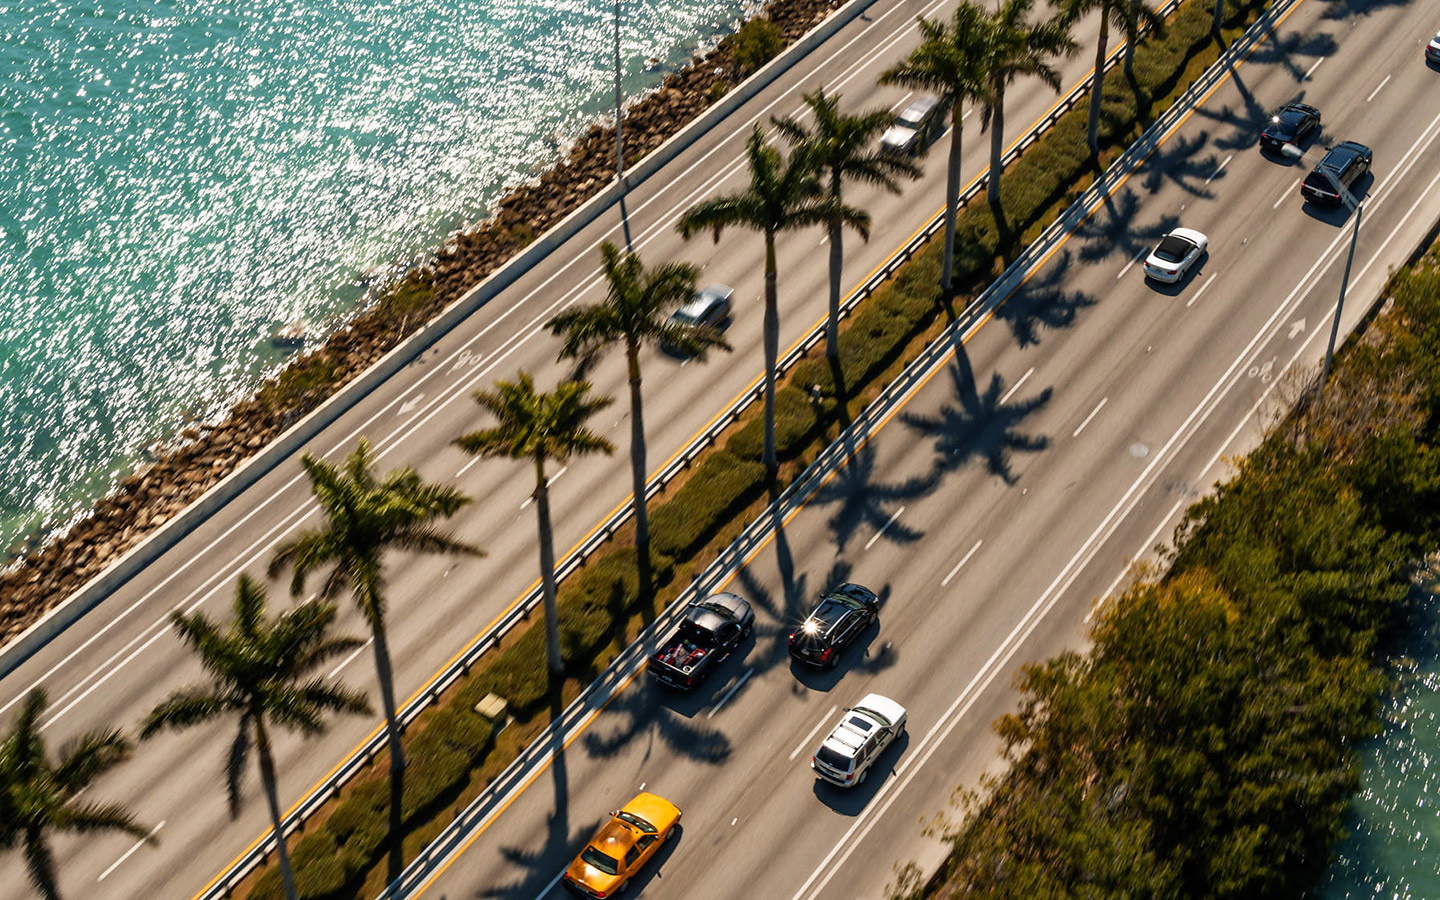 Driving in Miami: Everything You Need to Know - Florida Toyota Rental